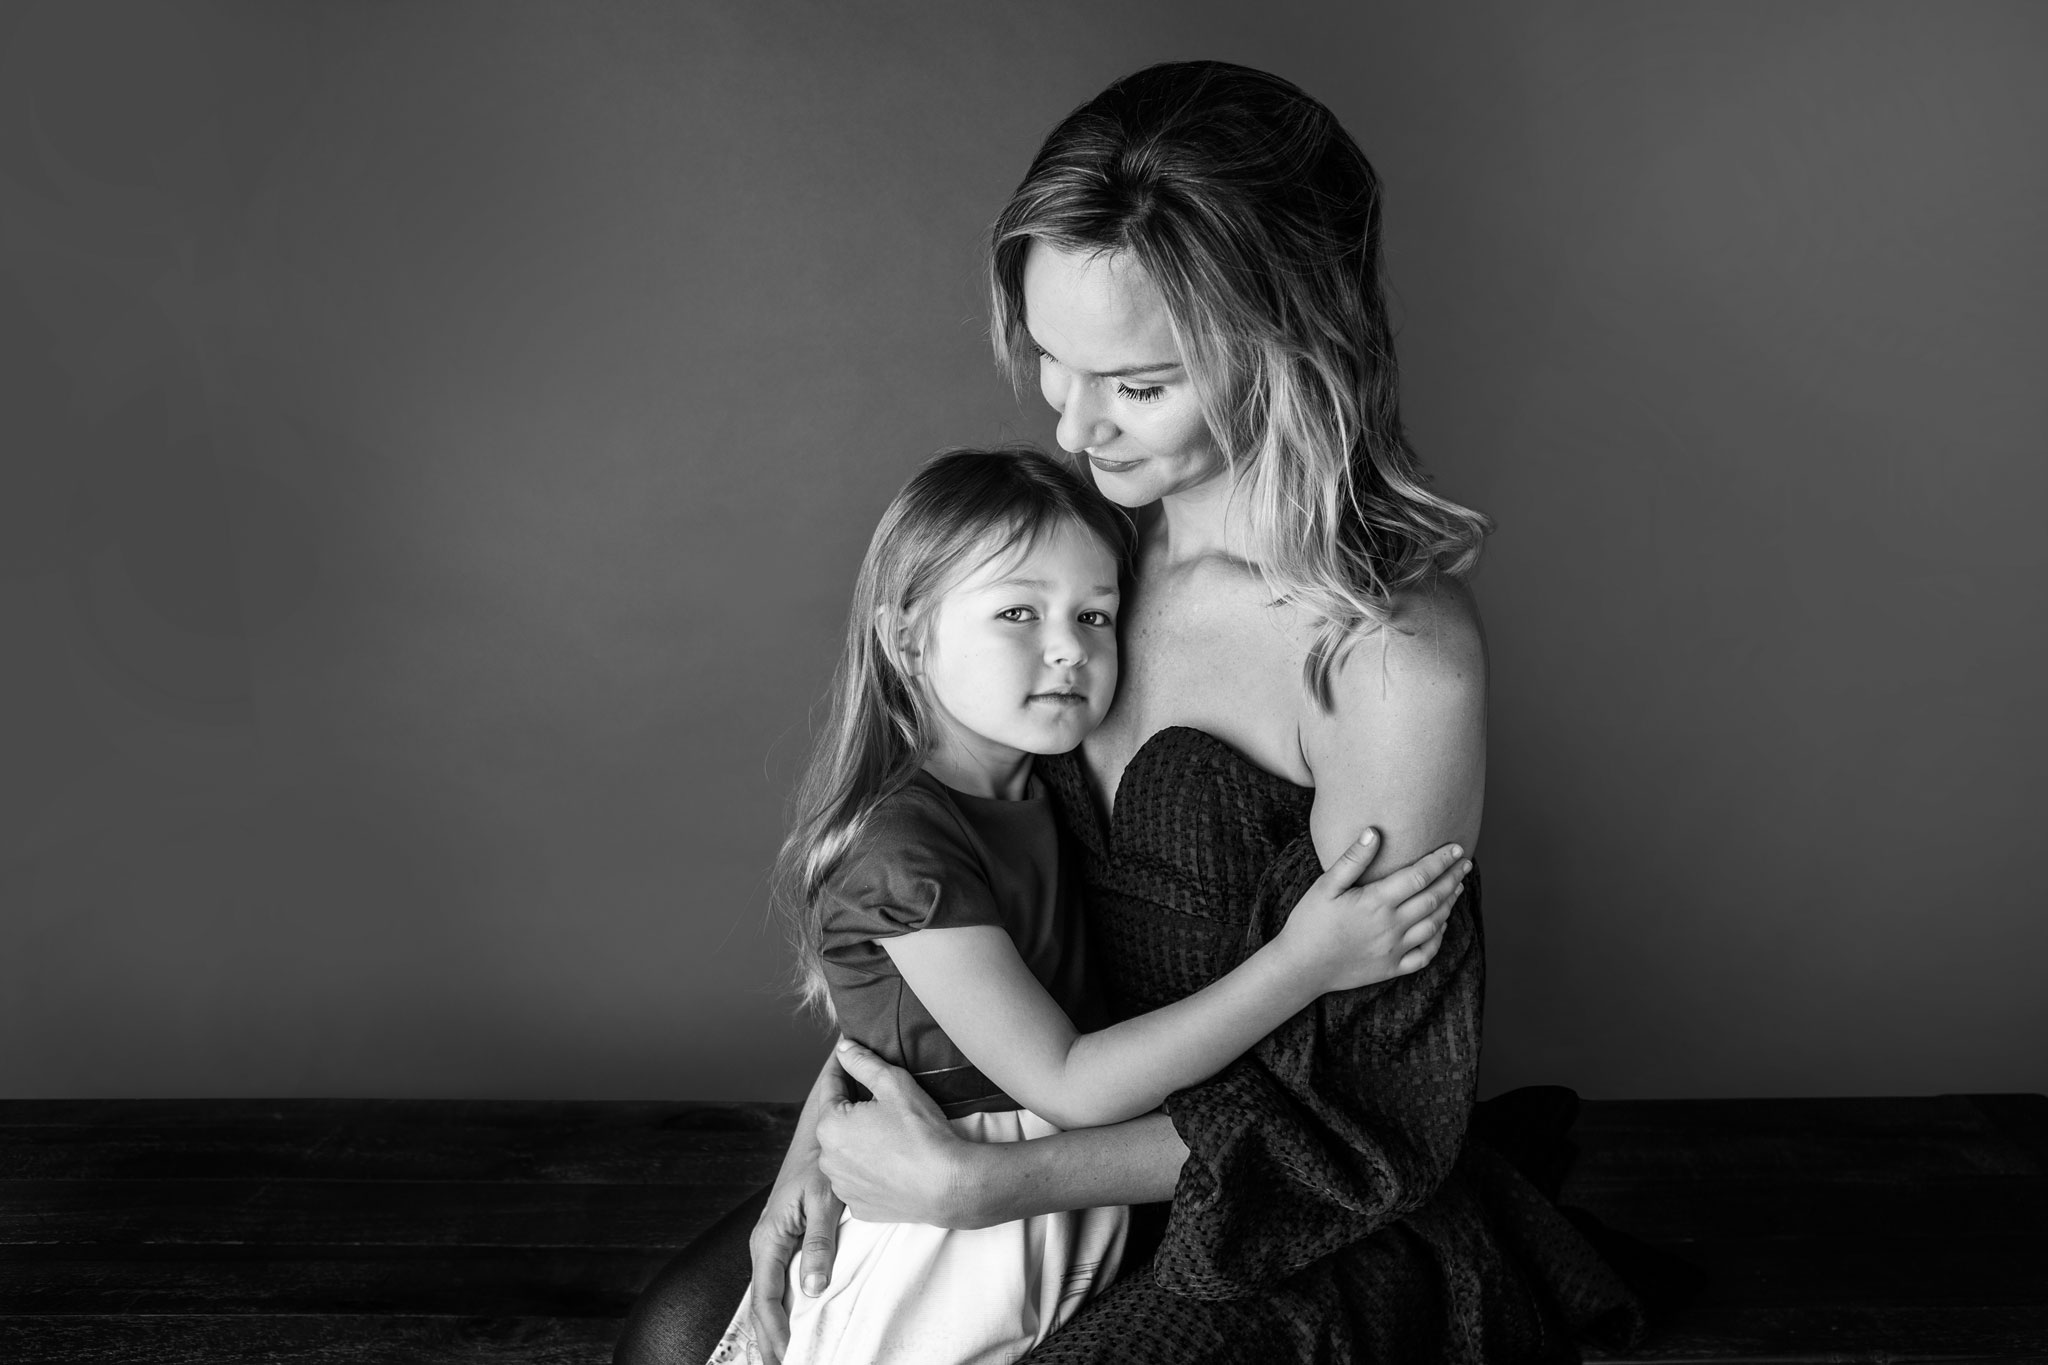 Studio portrait of mother and daughter embraced in eachother's arms